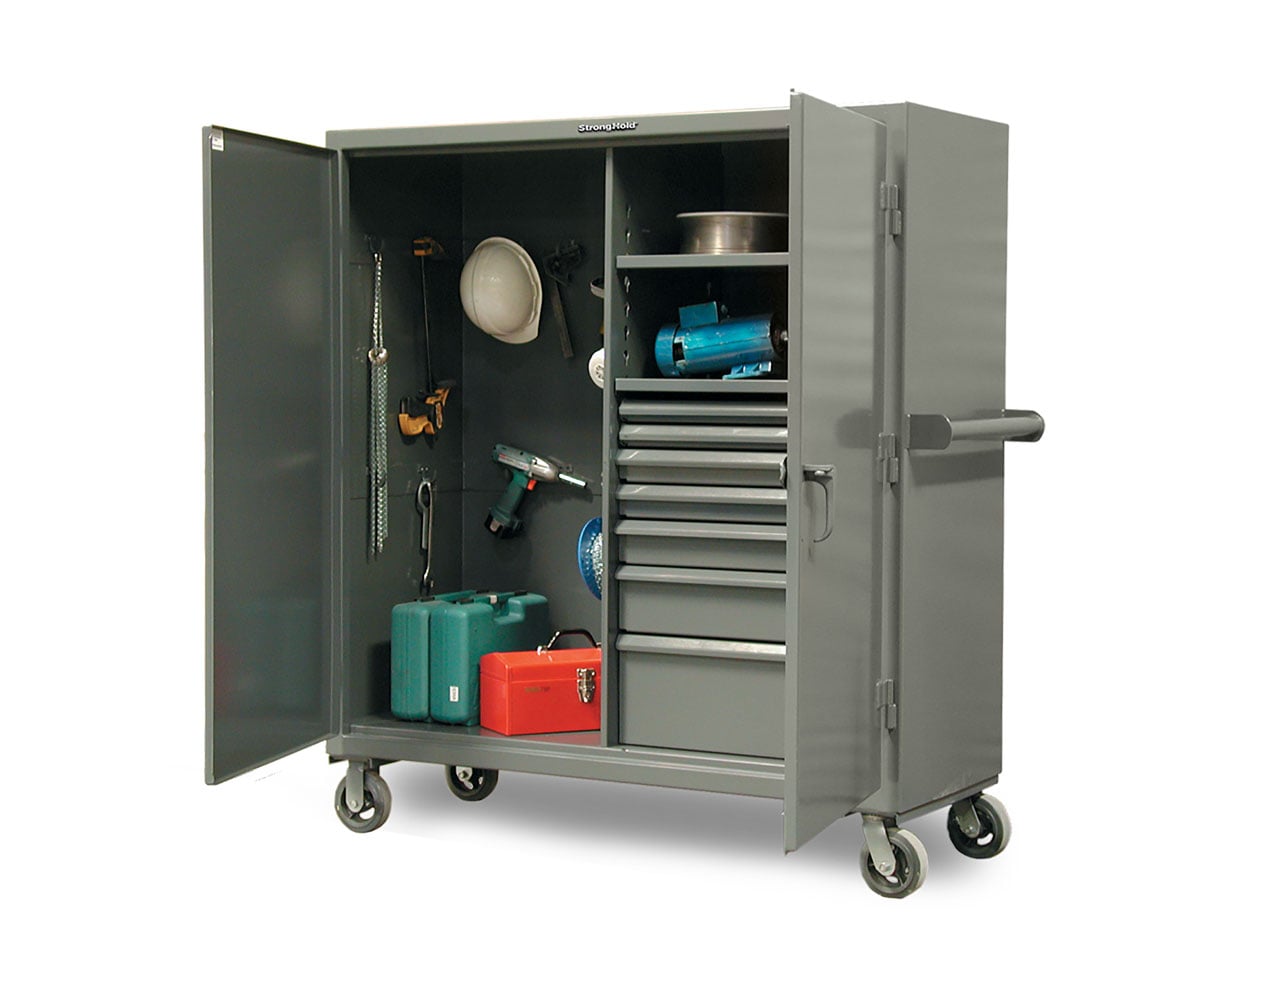 Extreme Duty 12 GA Mobile Rigging Cabinet with 7 Half-Width Drawers, 2 Shelves - 60 in. W x 24 in. D x 68 in. H